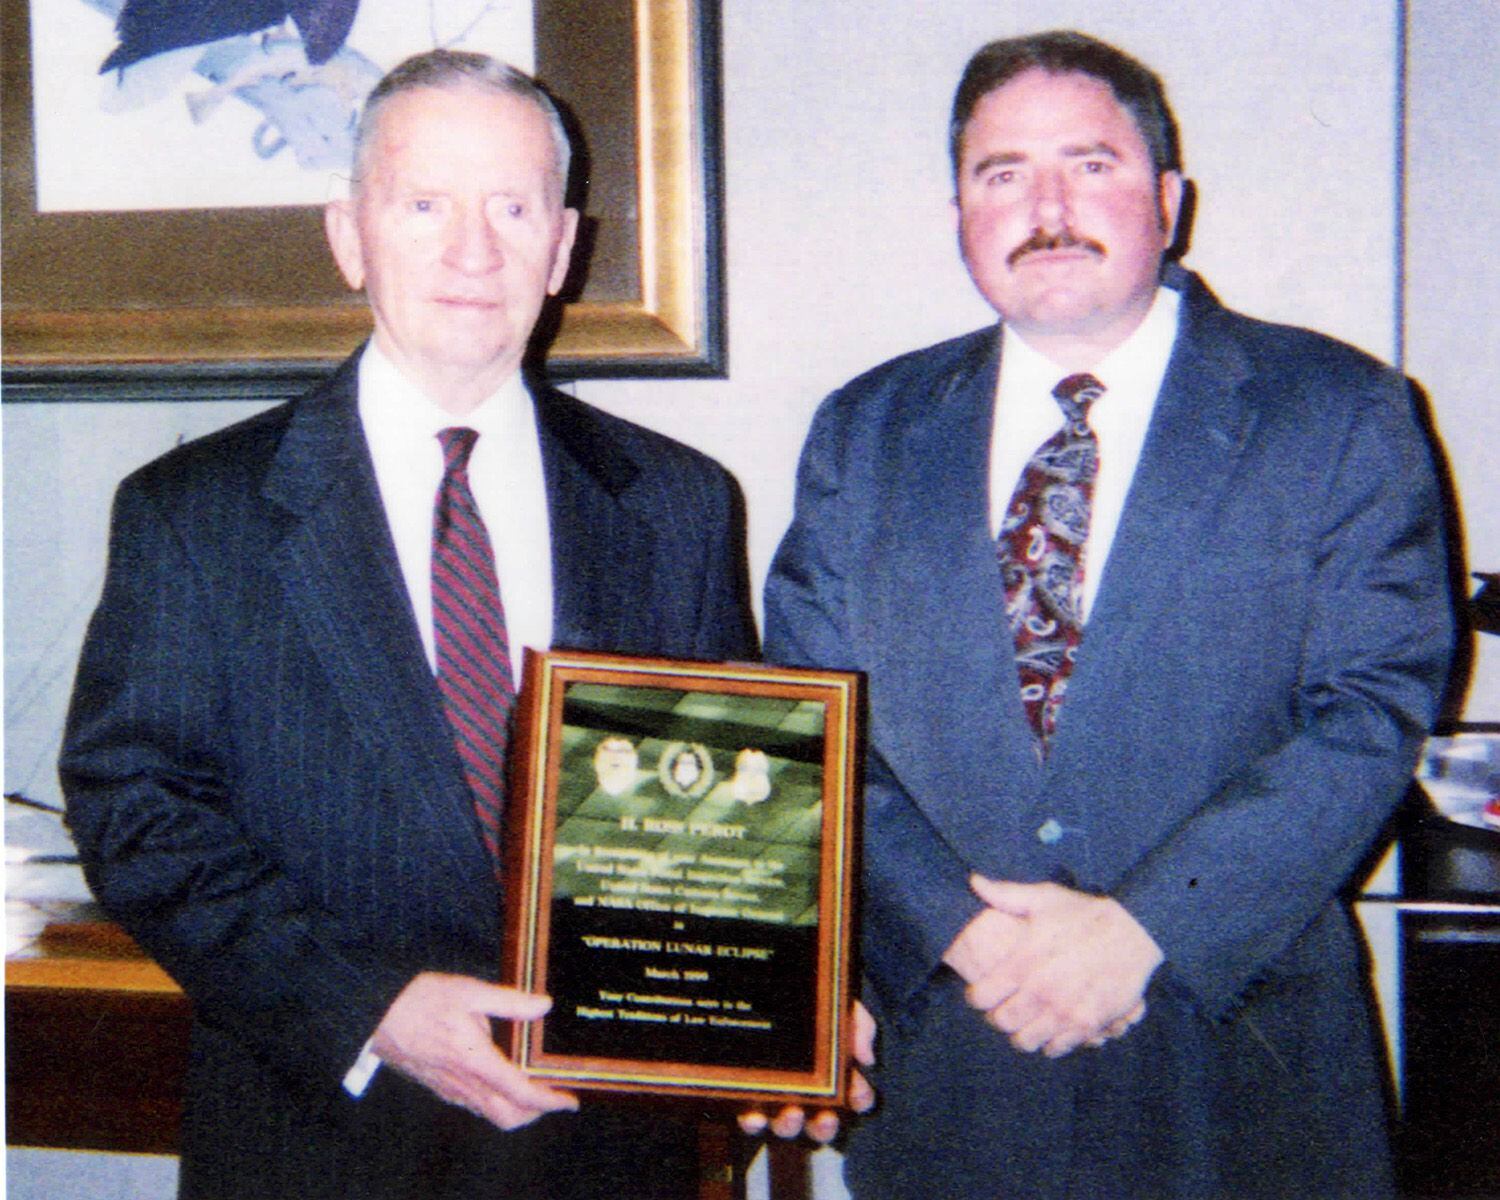 Ross Perot (left) is presented with a plaque by special agent Joseph Gutheinz (right)...